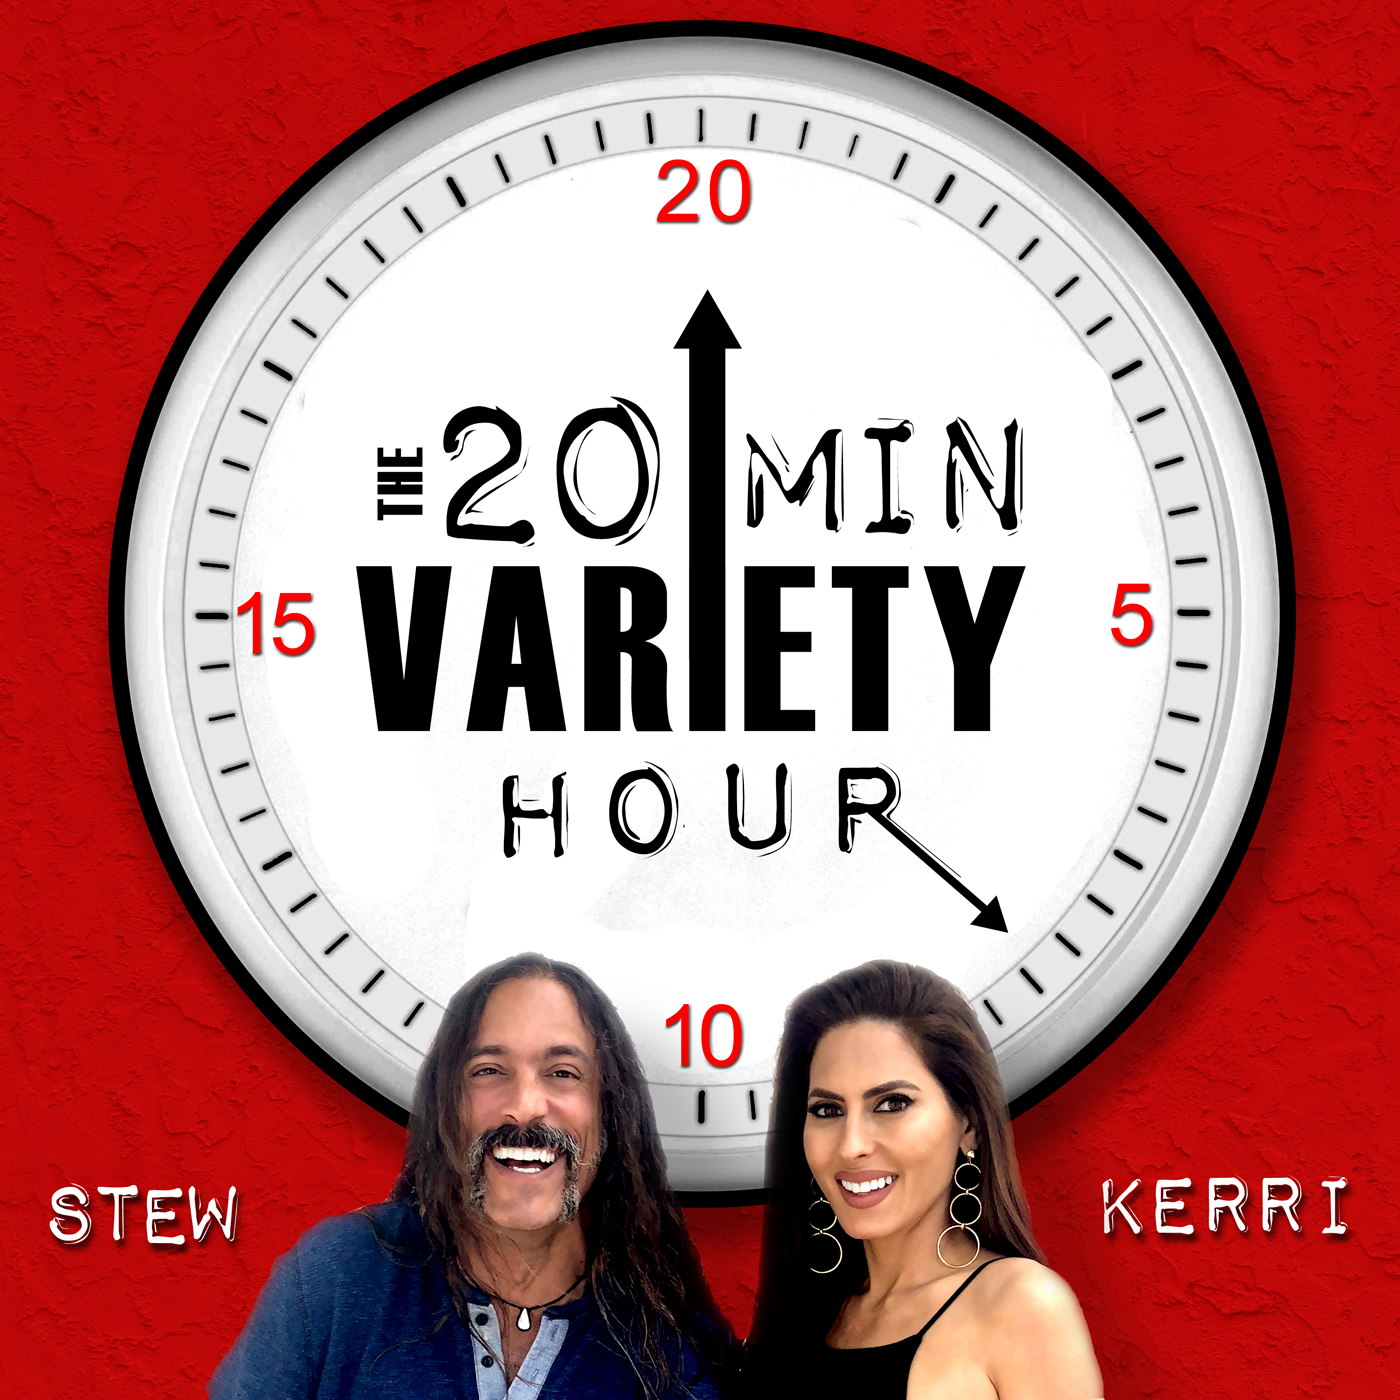 The 20 Min Variety Hour with Stew and Kerri